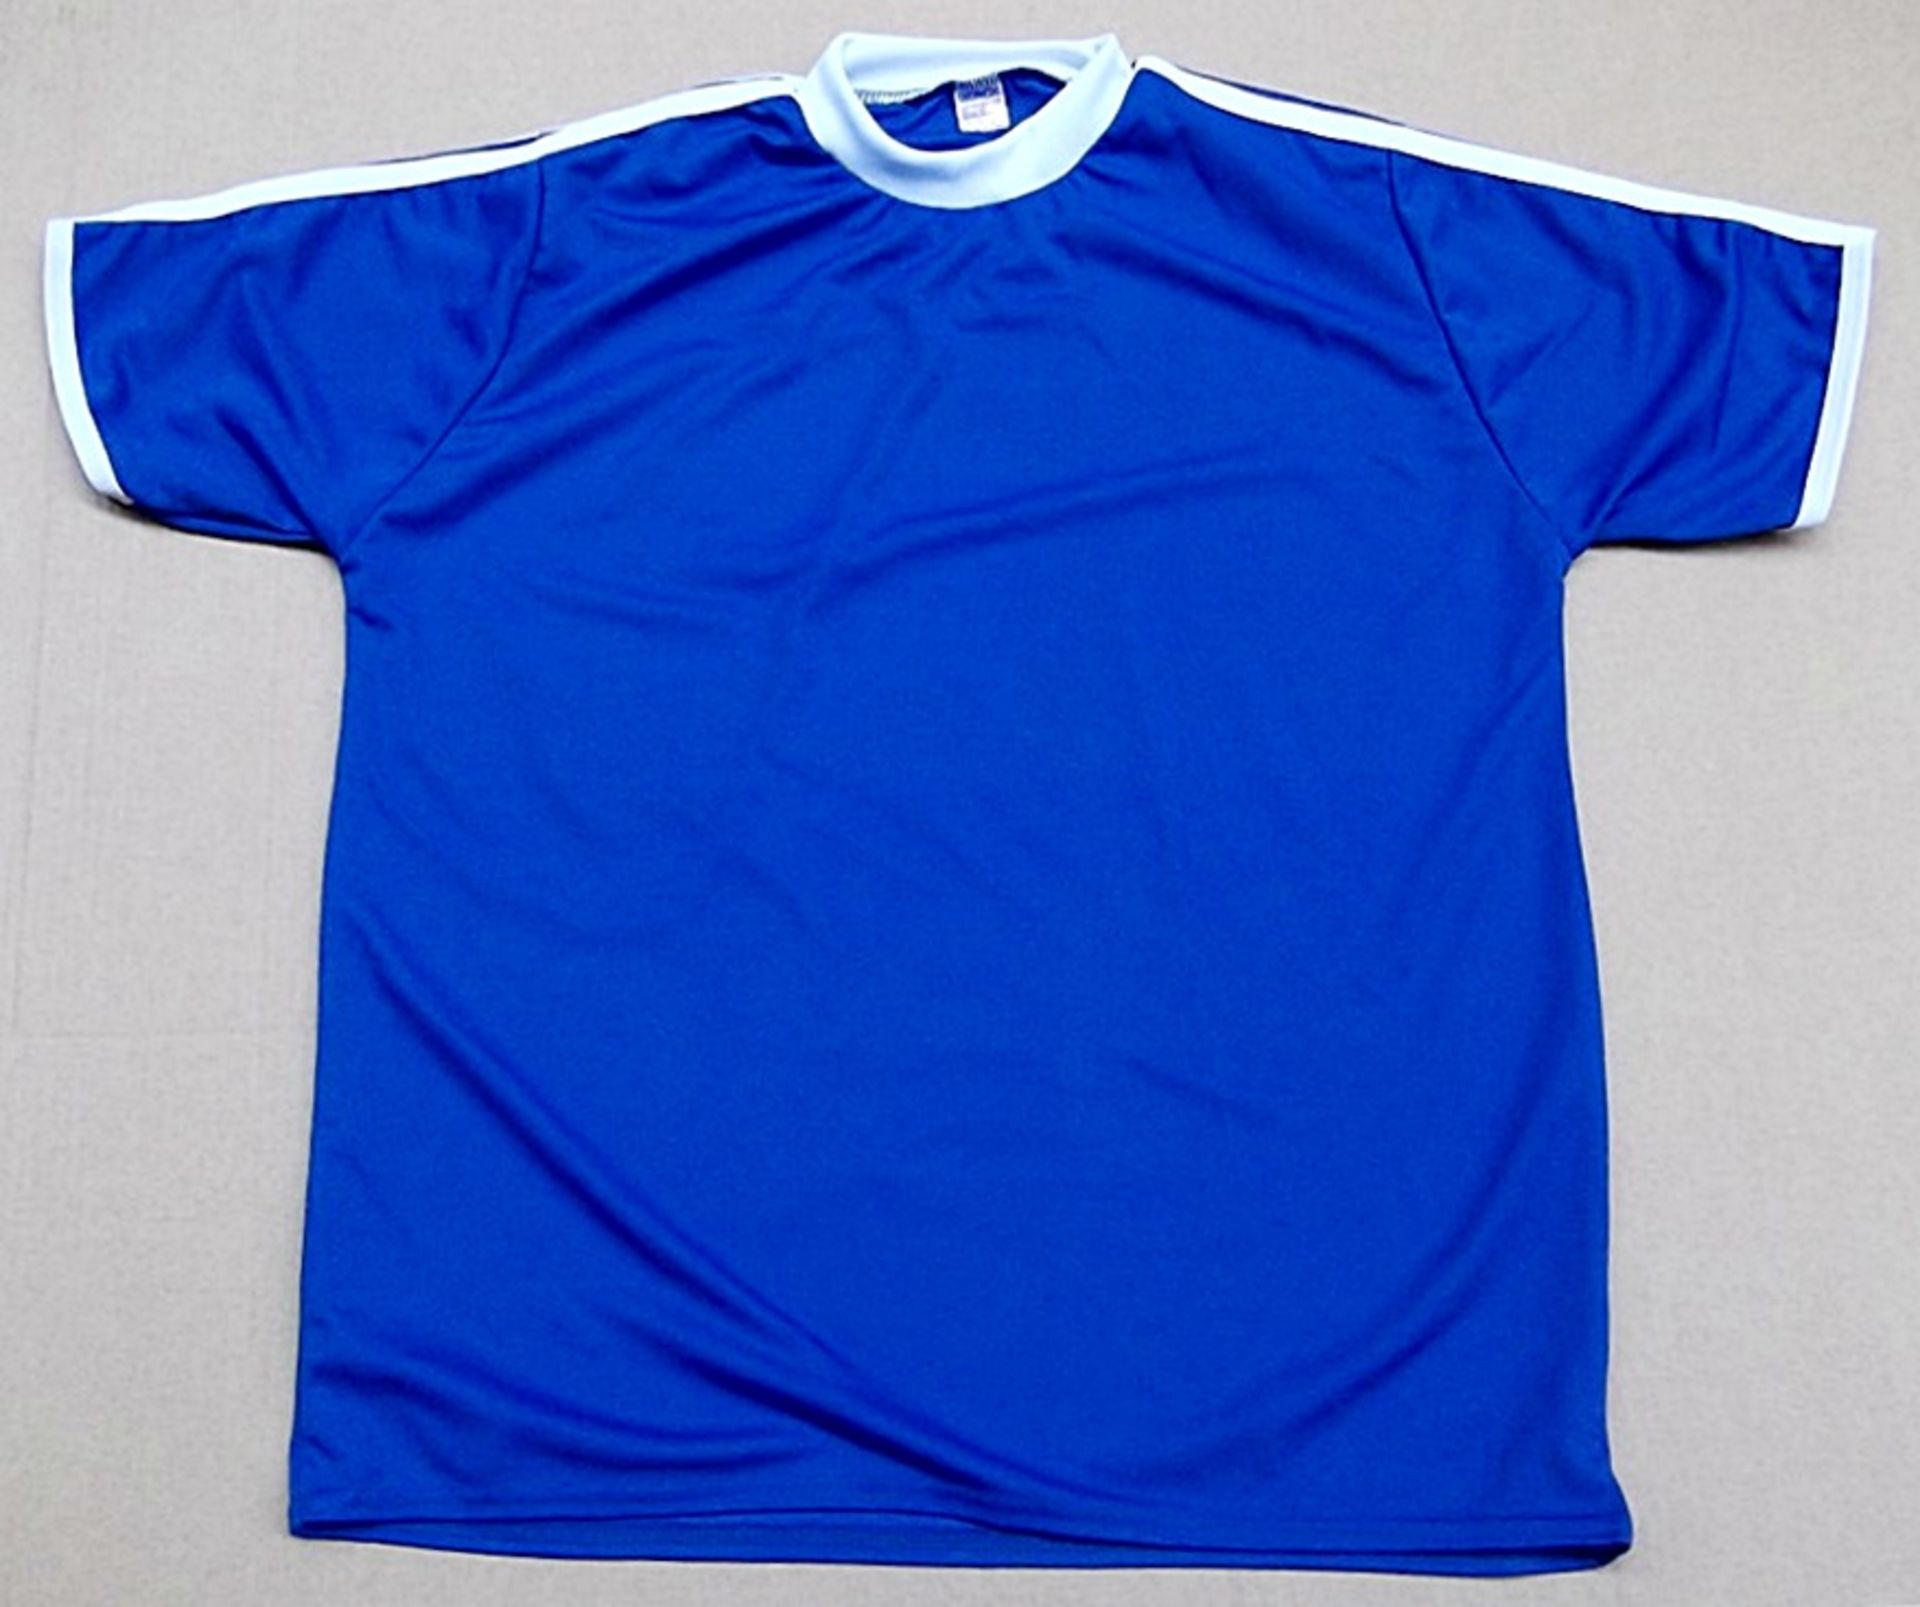 33 x Plain Football Short Sleeve Shirts - 2 Colours Supplied : Bright Blue With WHITE Detailing, and